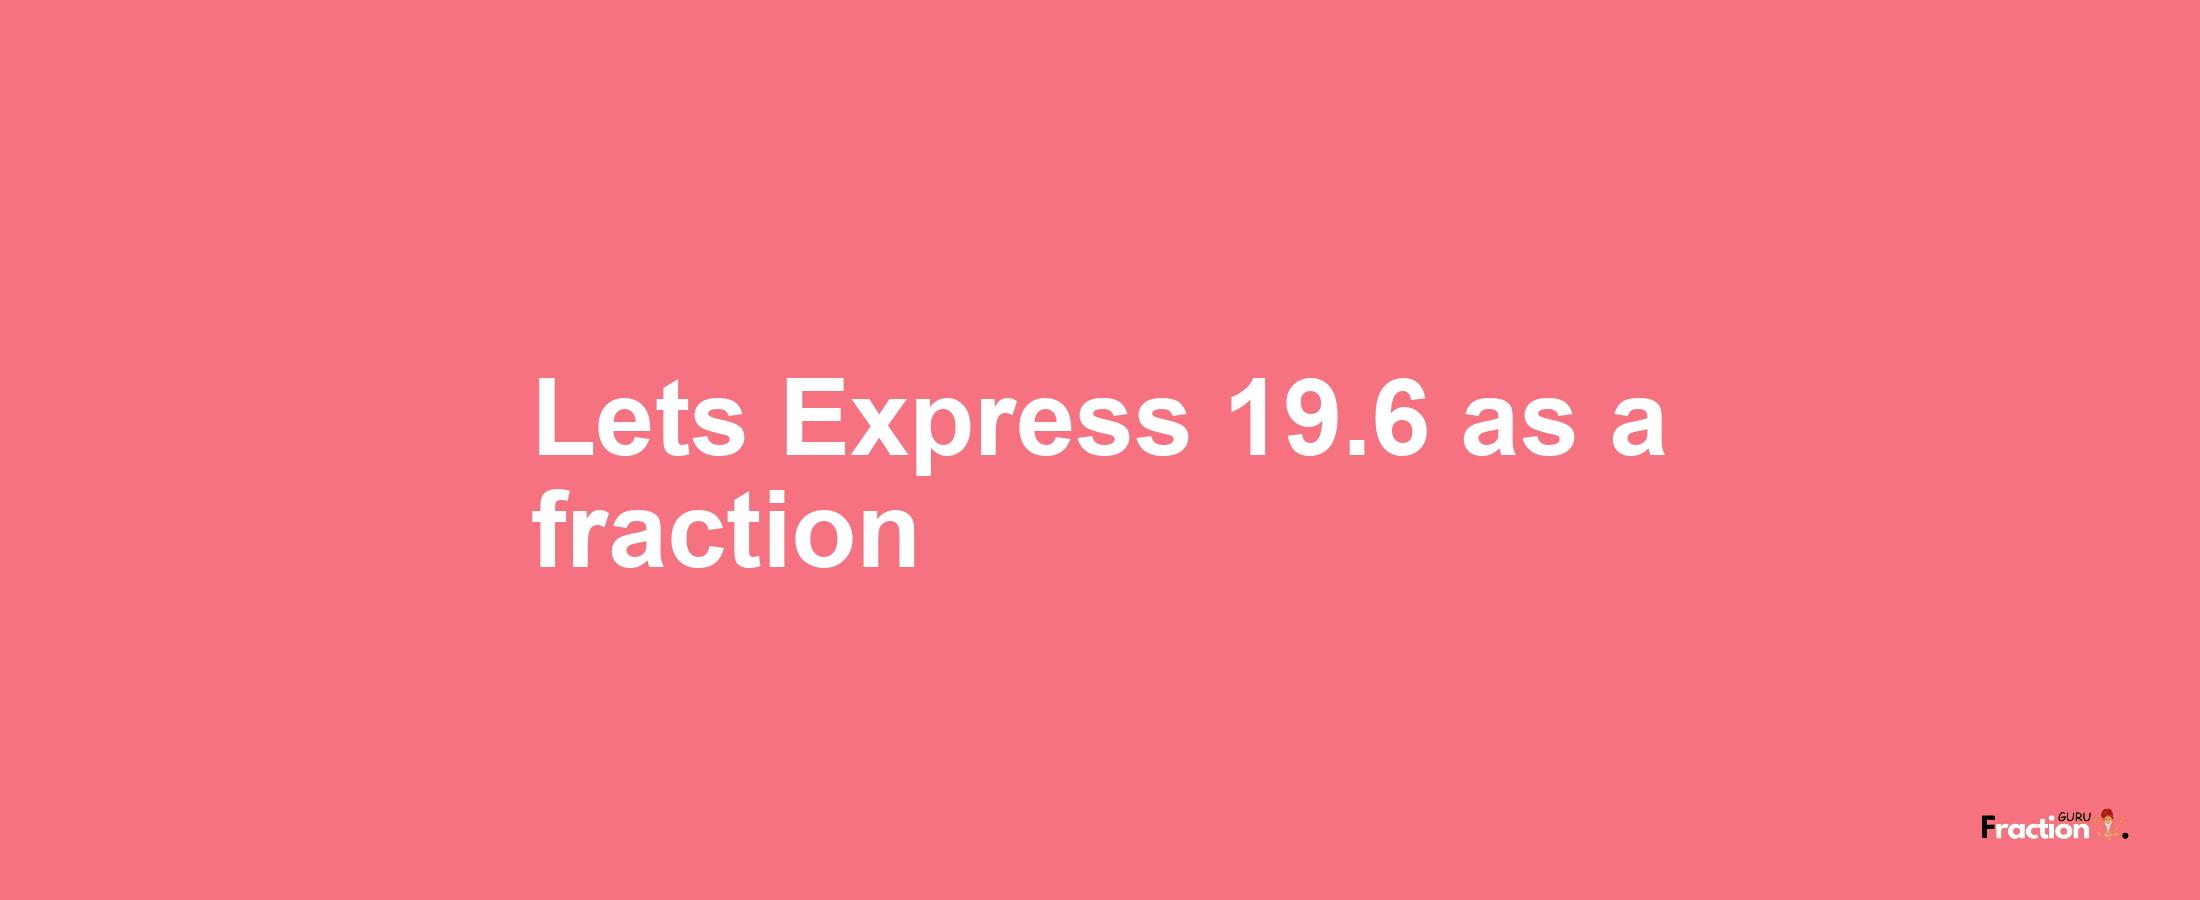 Lets Express 19.6 as afraction